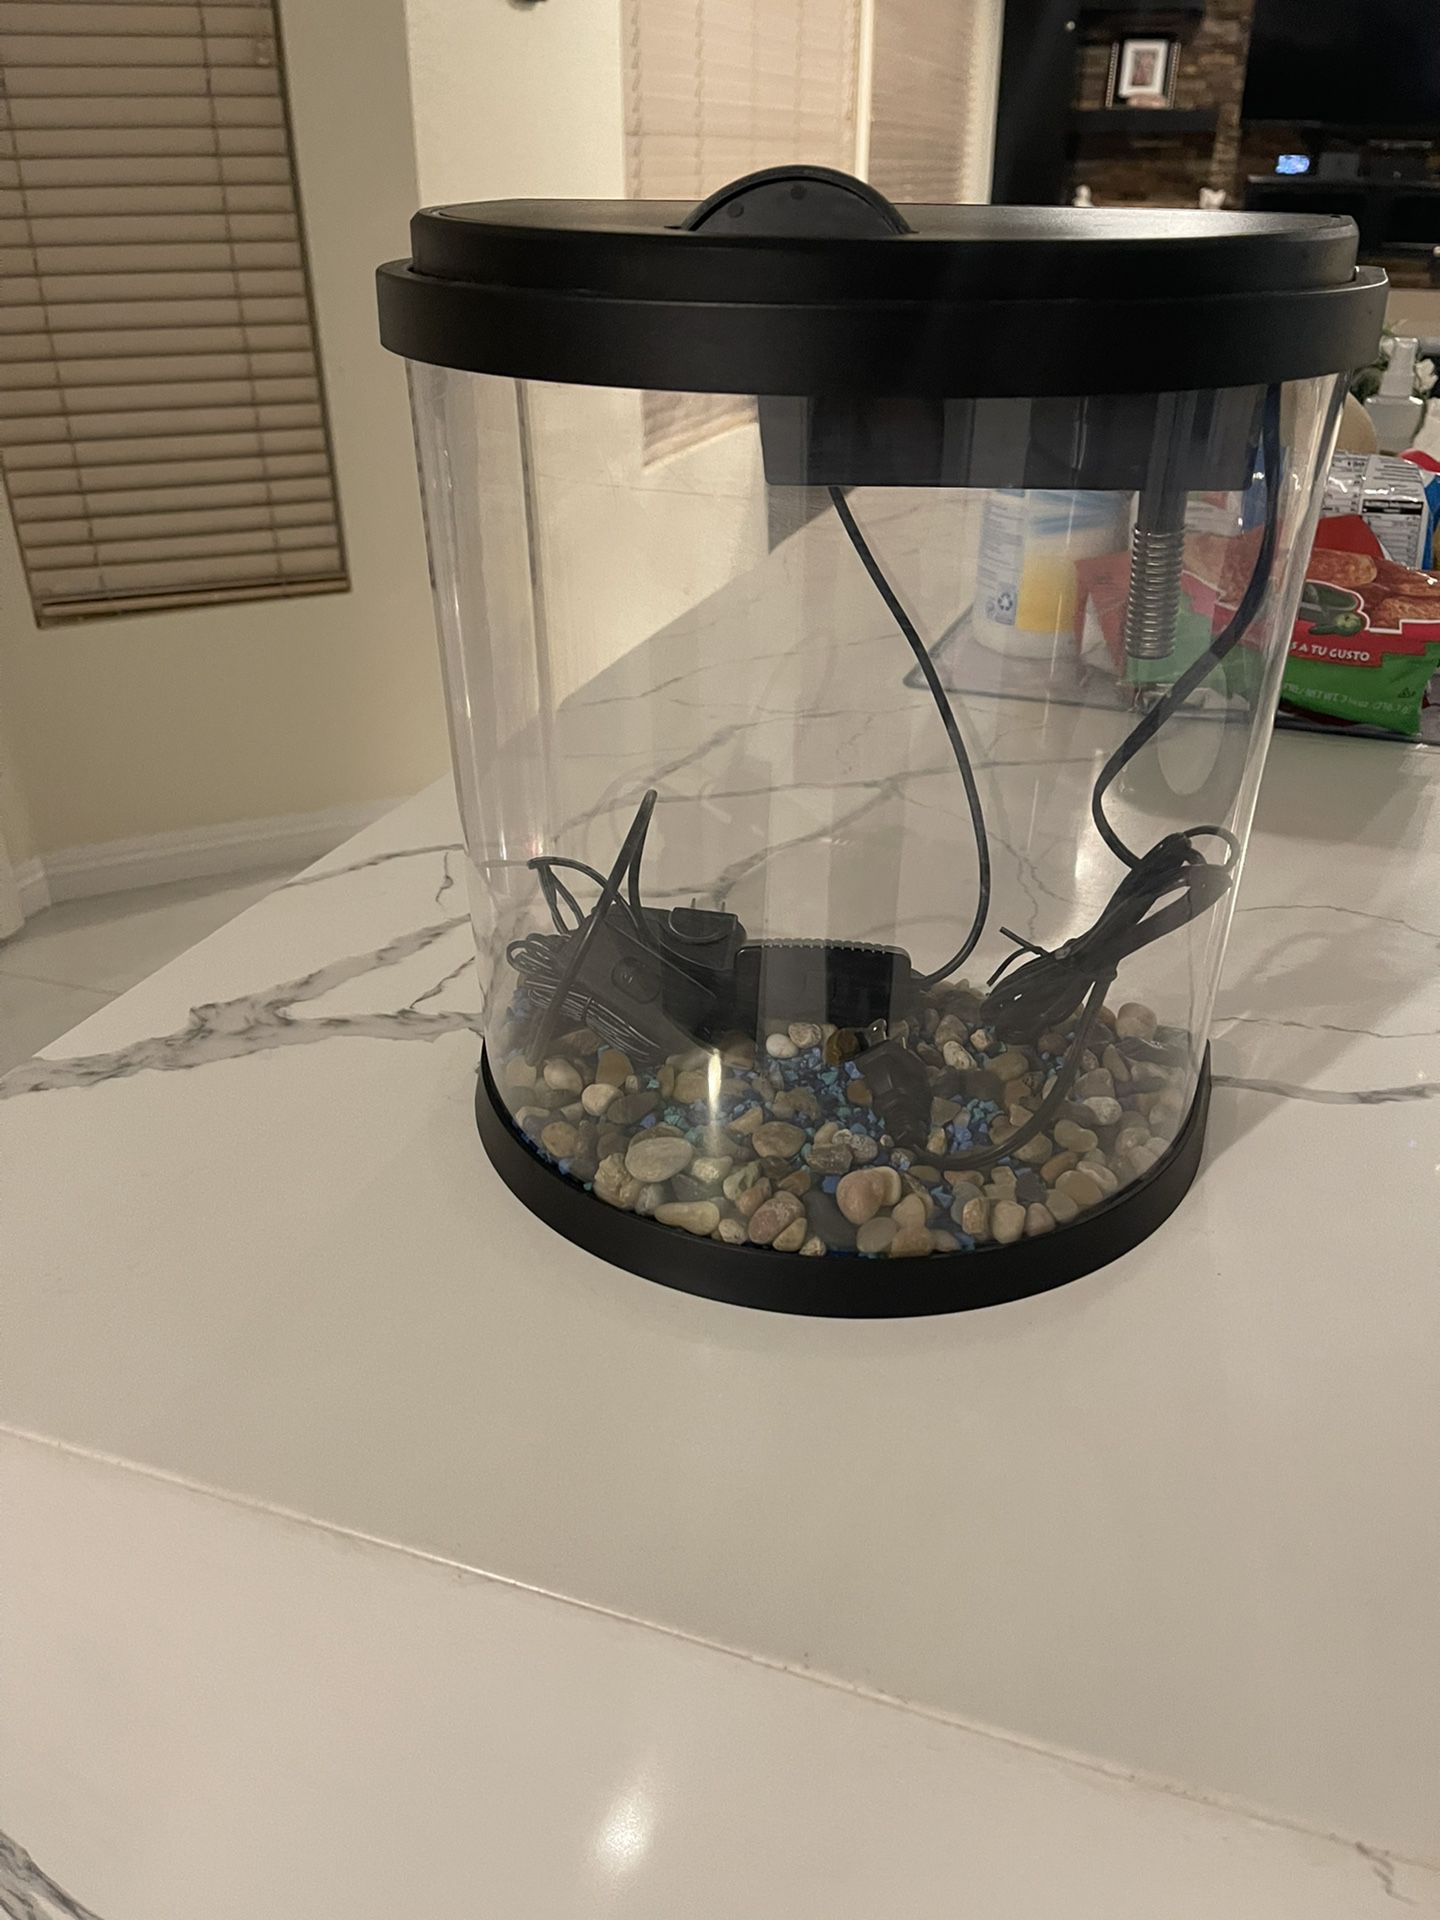 3 QUART FISH TANK WITH FILTER INCLUDED - ALMOST NEW 